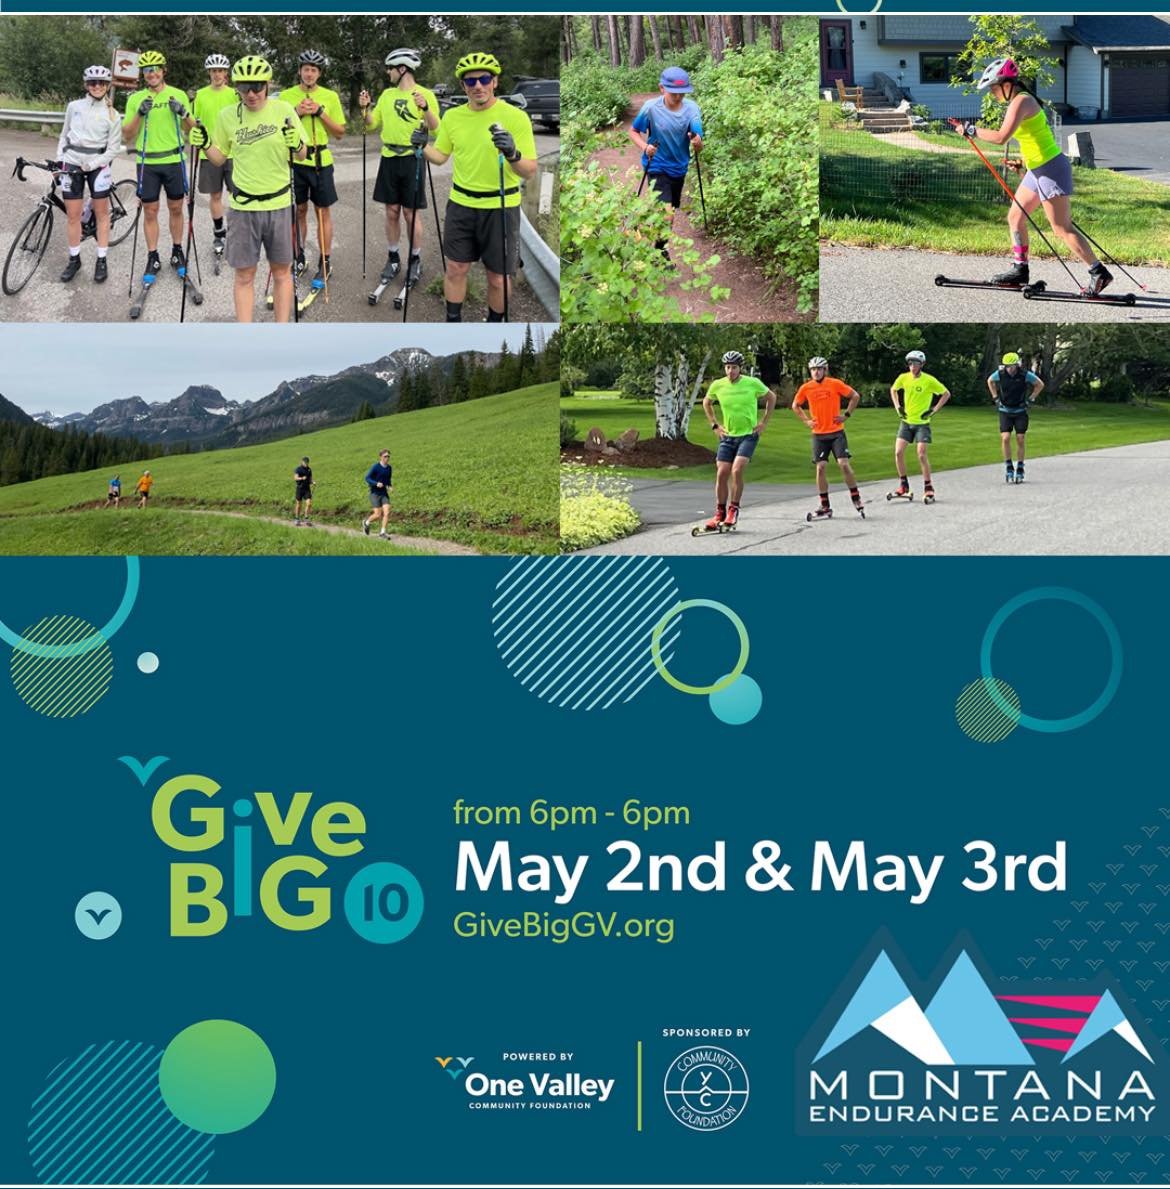 Bozeman is a great place for raising kids, especially for recreation for young families and adults.  Montana Endurance Academy is dedicated to providing quality programs for all ages and abilities. 
Working together, with your additional support help